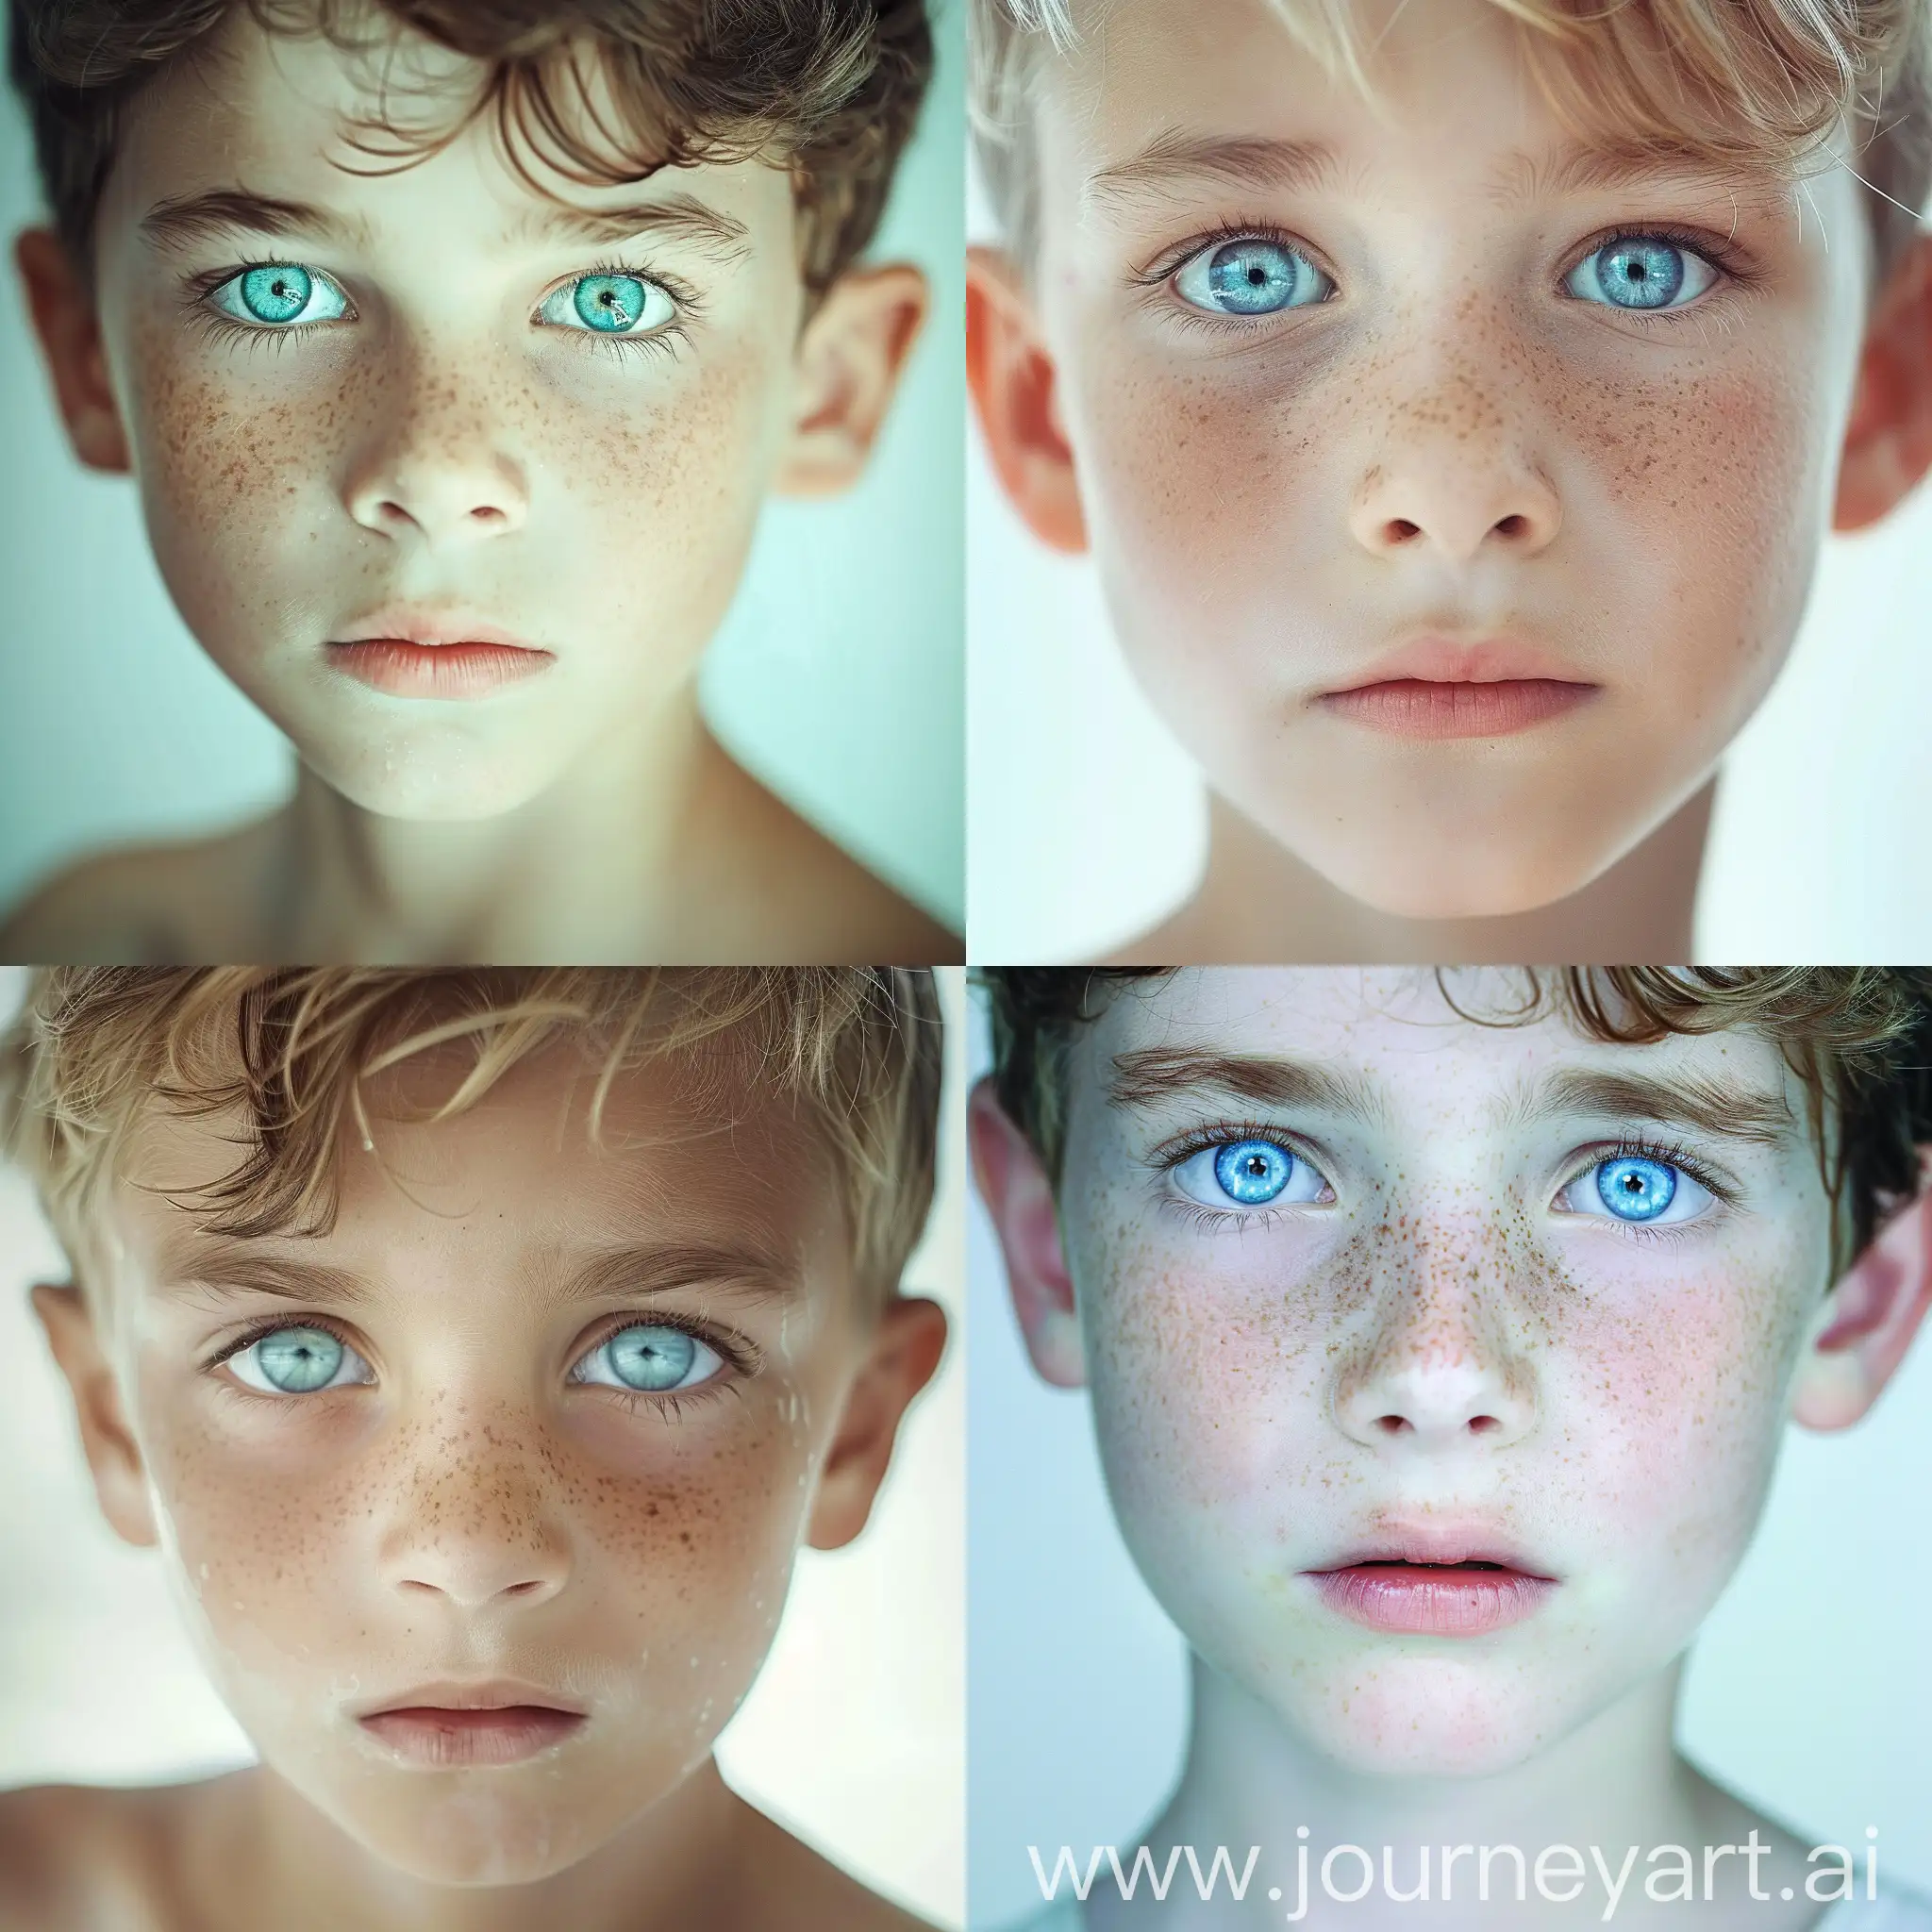 Young cute european (german) boy aged 10-12 with beautiful blue ocean like eyes and a white skin. the skin has no imperfections and hes looking into viewers eyes.
